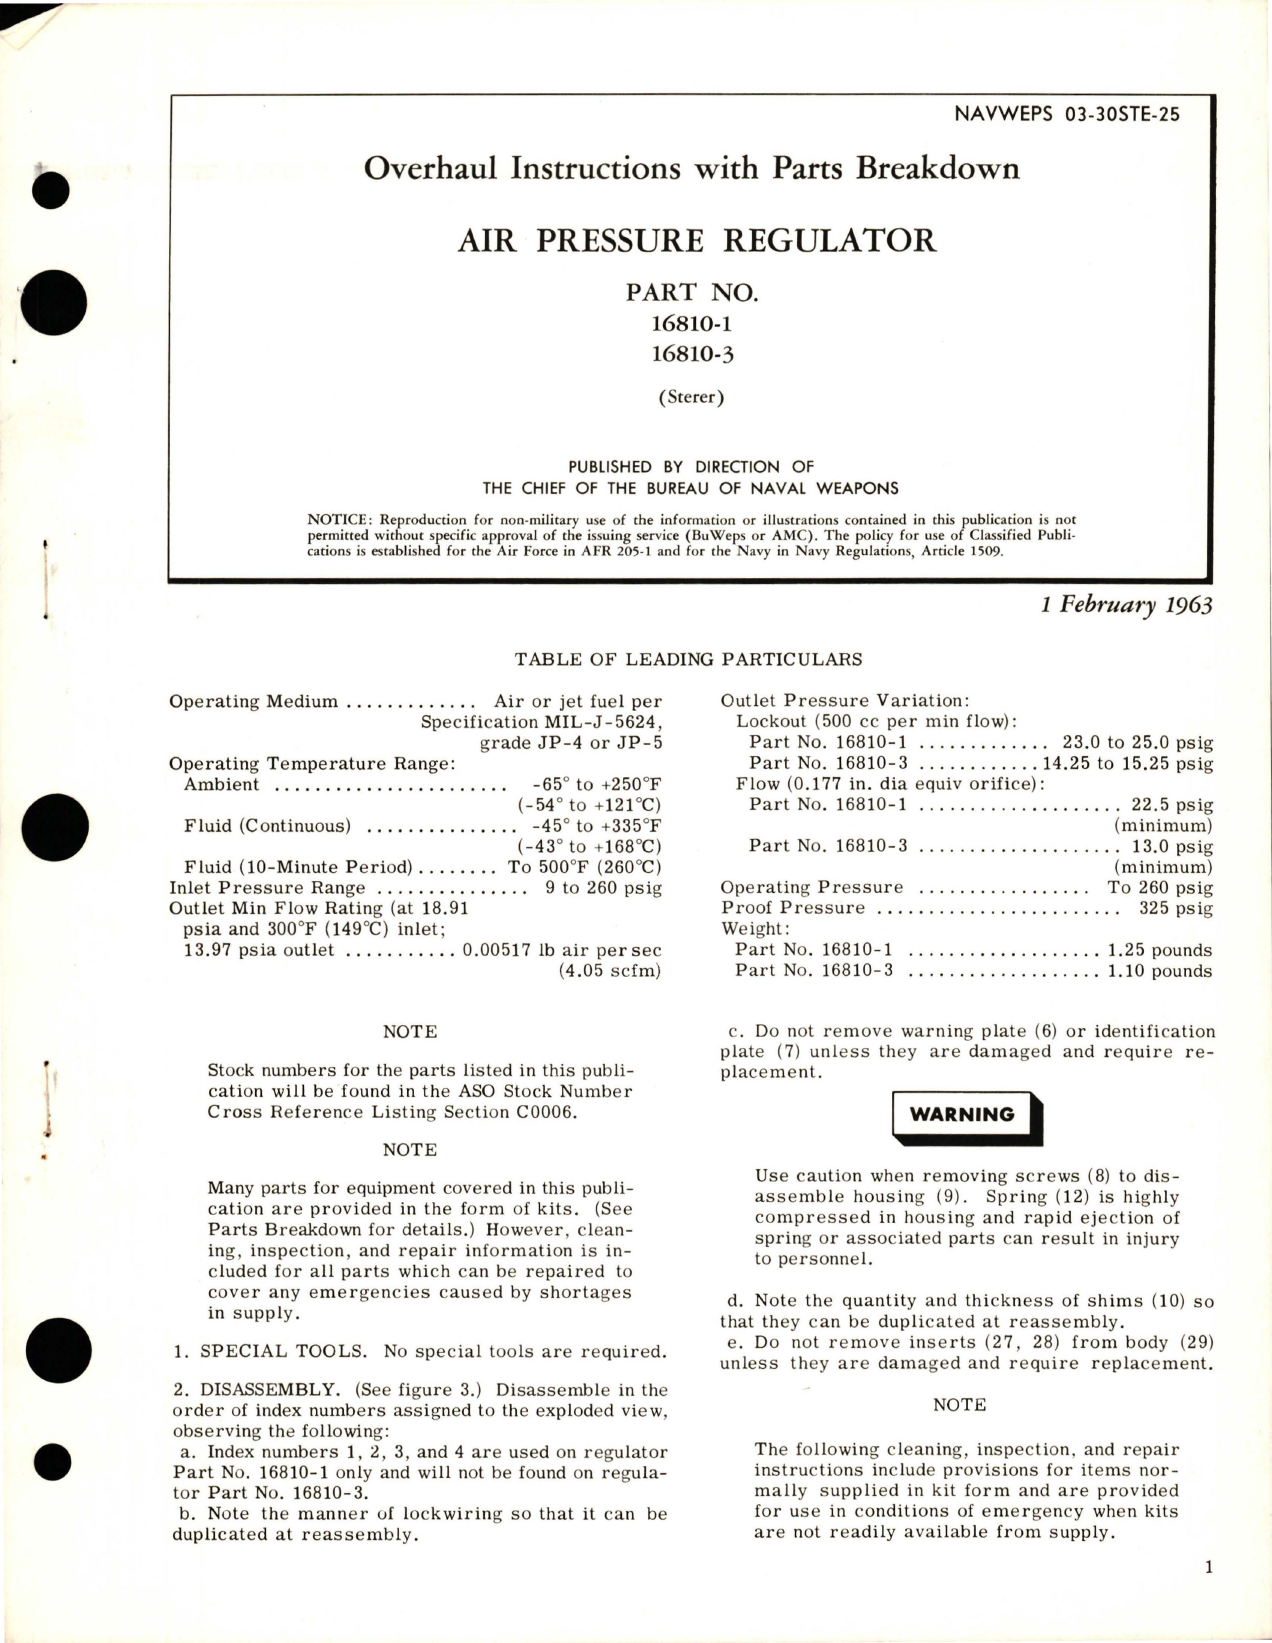 Sample page 1 from AirCorps Library document: Overhaul Instructions with Parts Breakdown for Air Pressure Regulator - Part 16810-1 and 16810-3